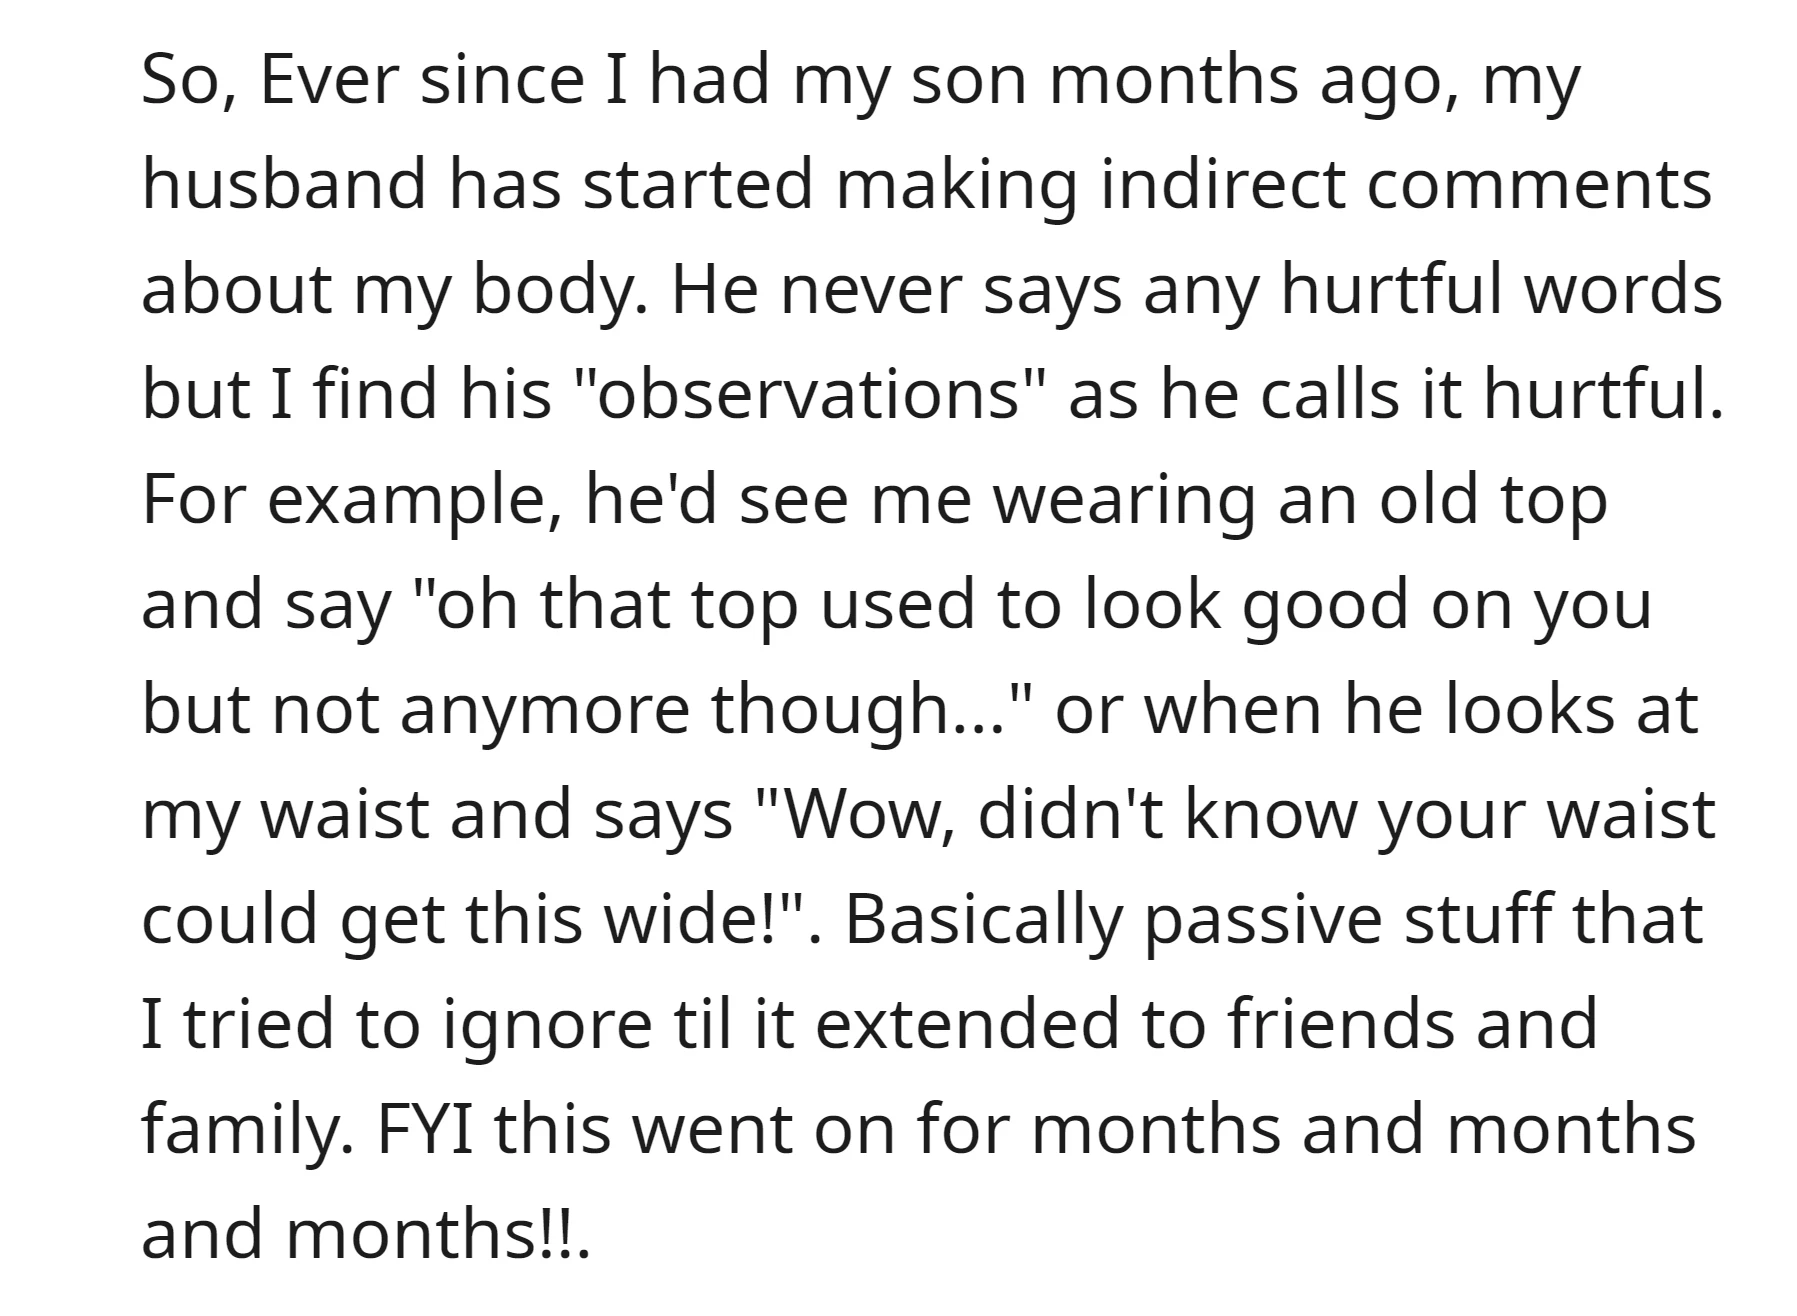 OP's husband has been consistently making indirect comments about her body